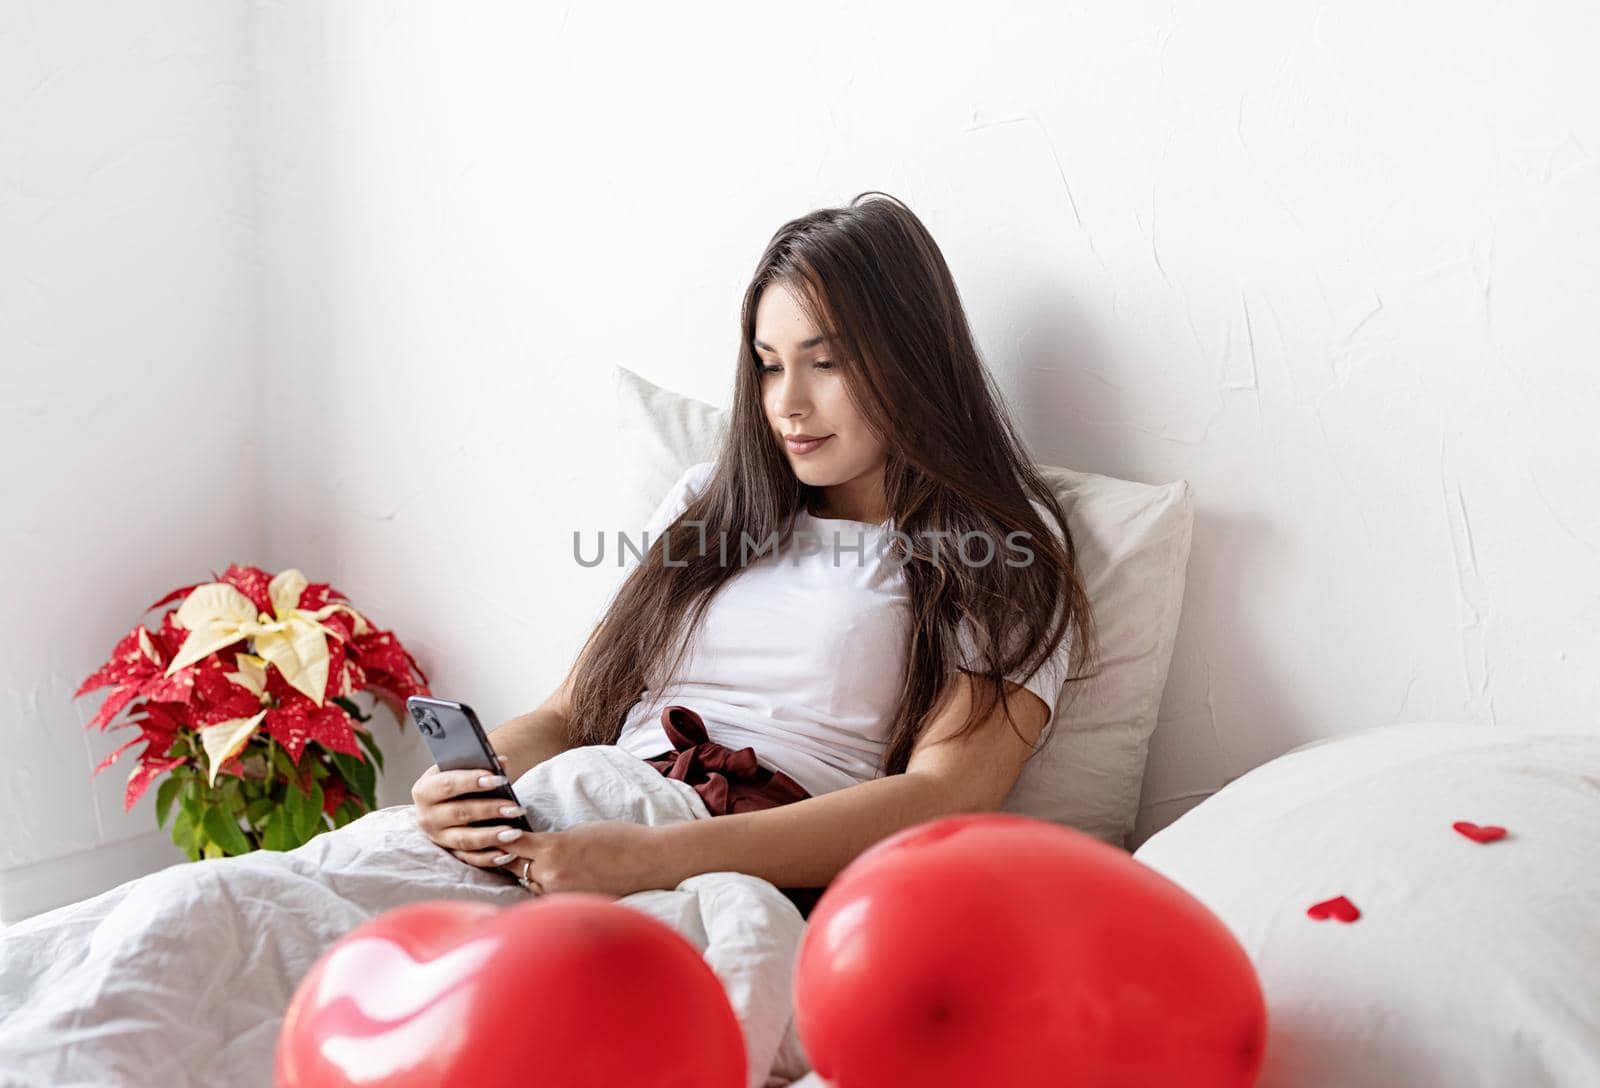 Valentines Day. Young brunette woman sitting awake in the bed with red heart shaped balloons and decorations texting